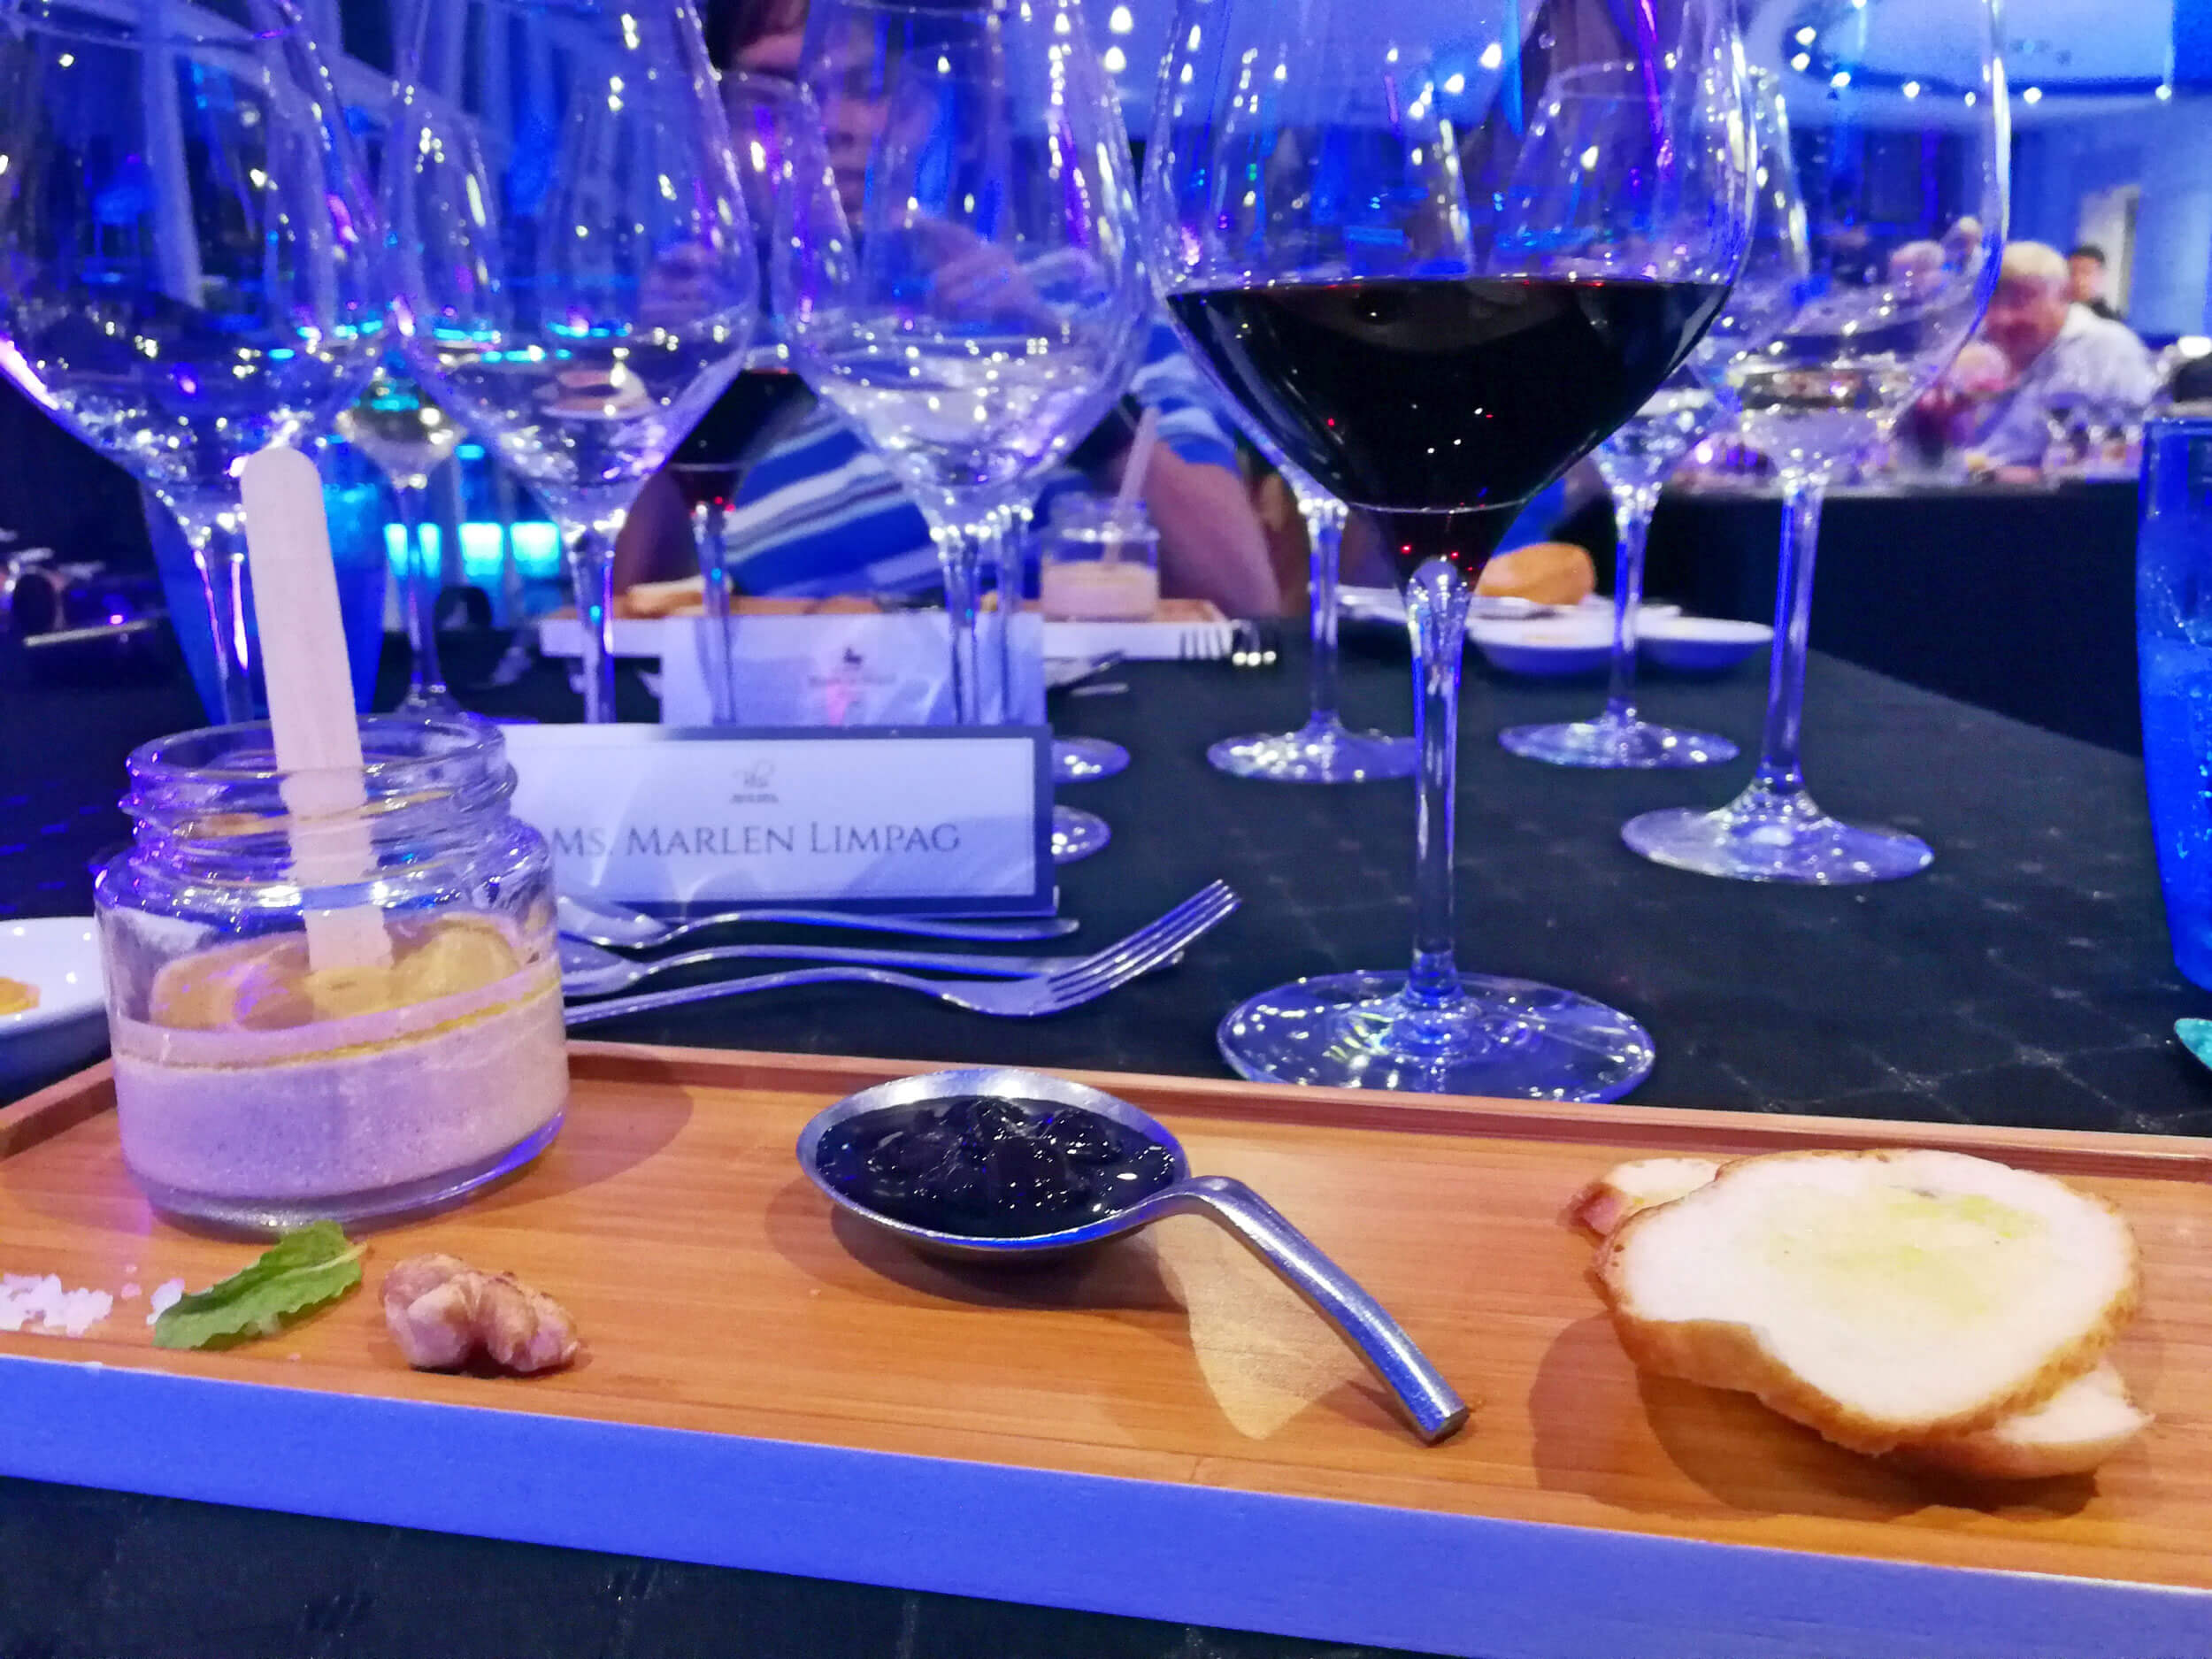 Moonlit Wine Dinner at the Blu Bar and Grill of Marco Polo Plaza Cebu